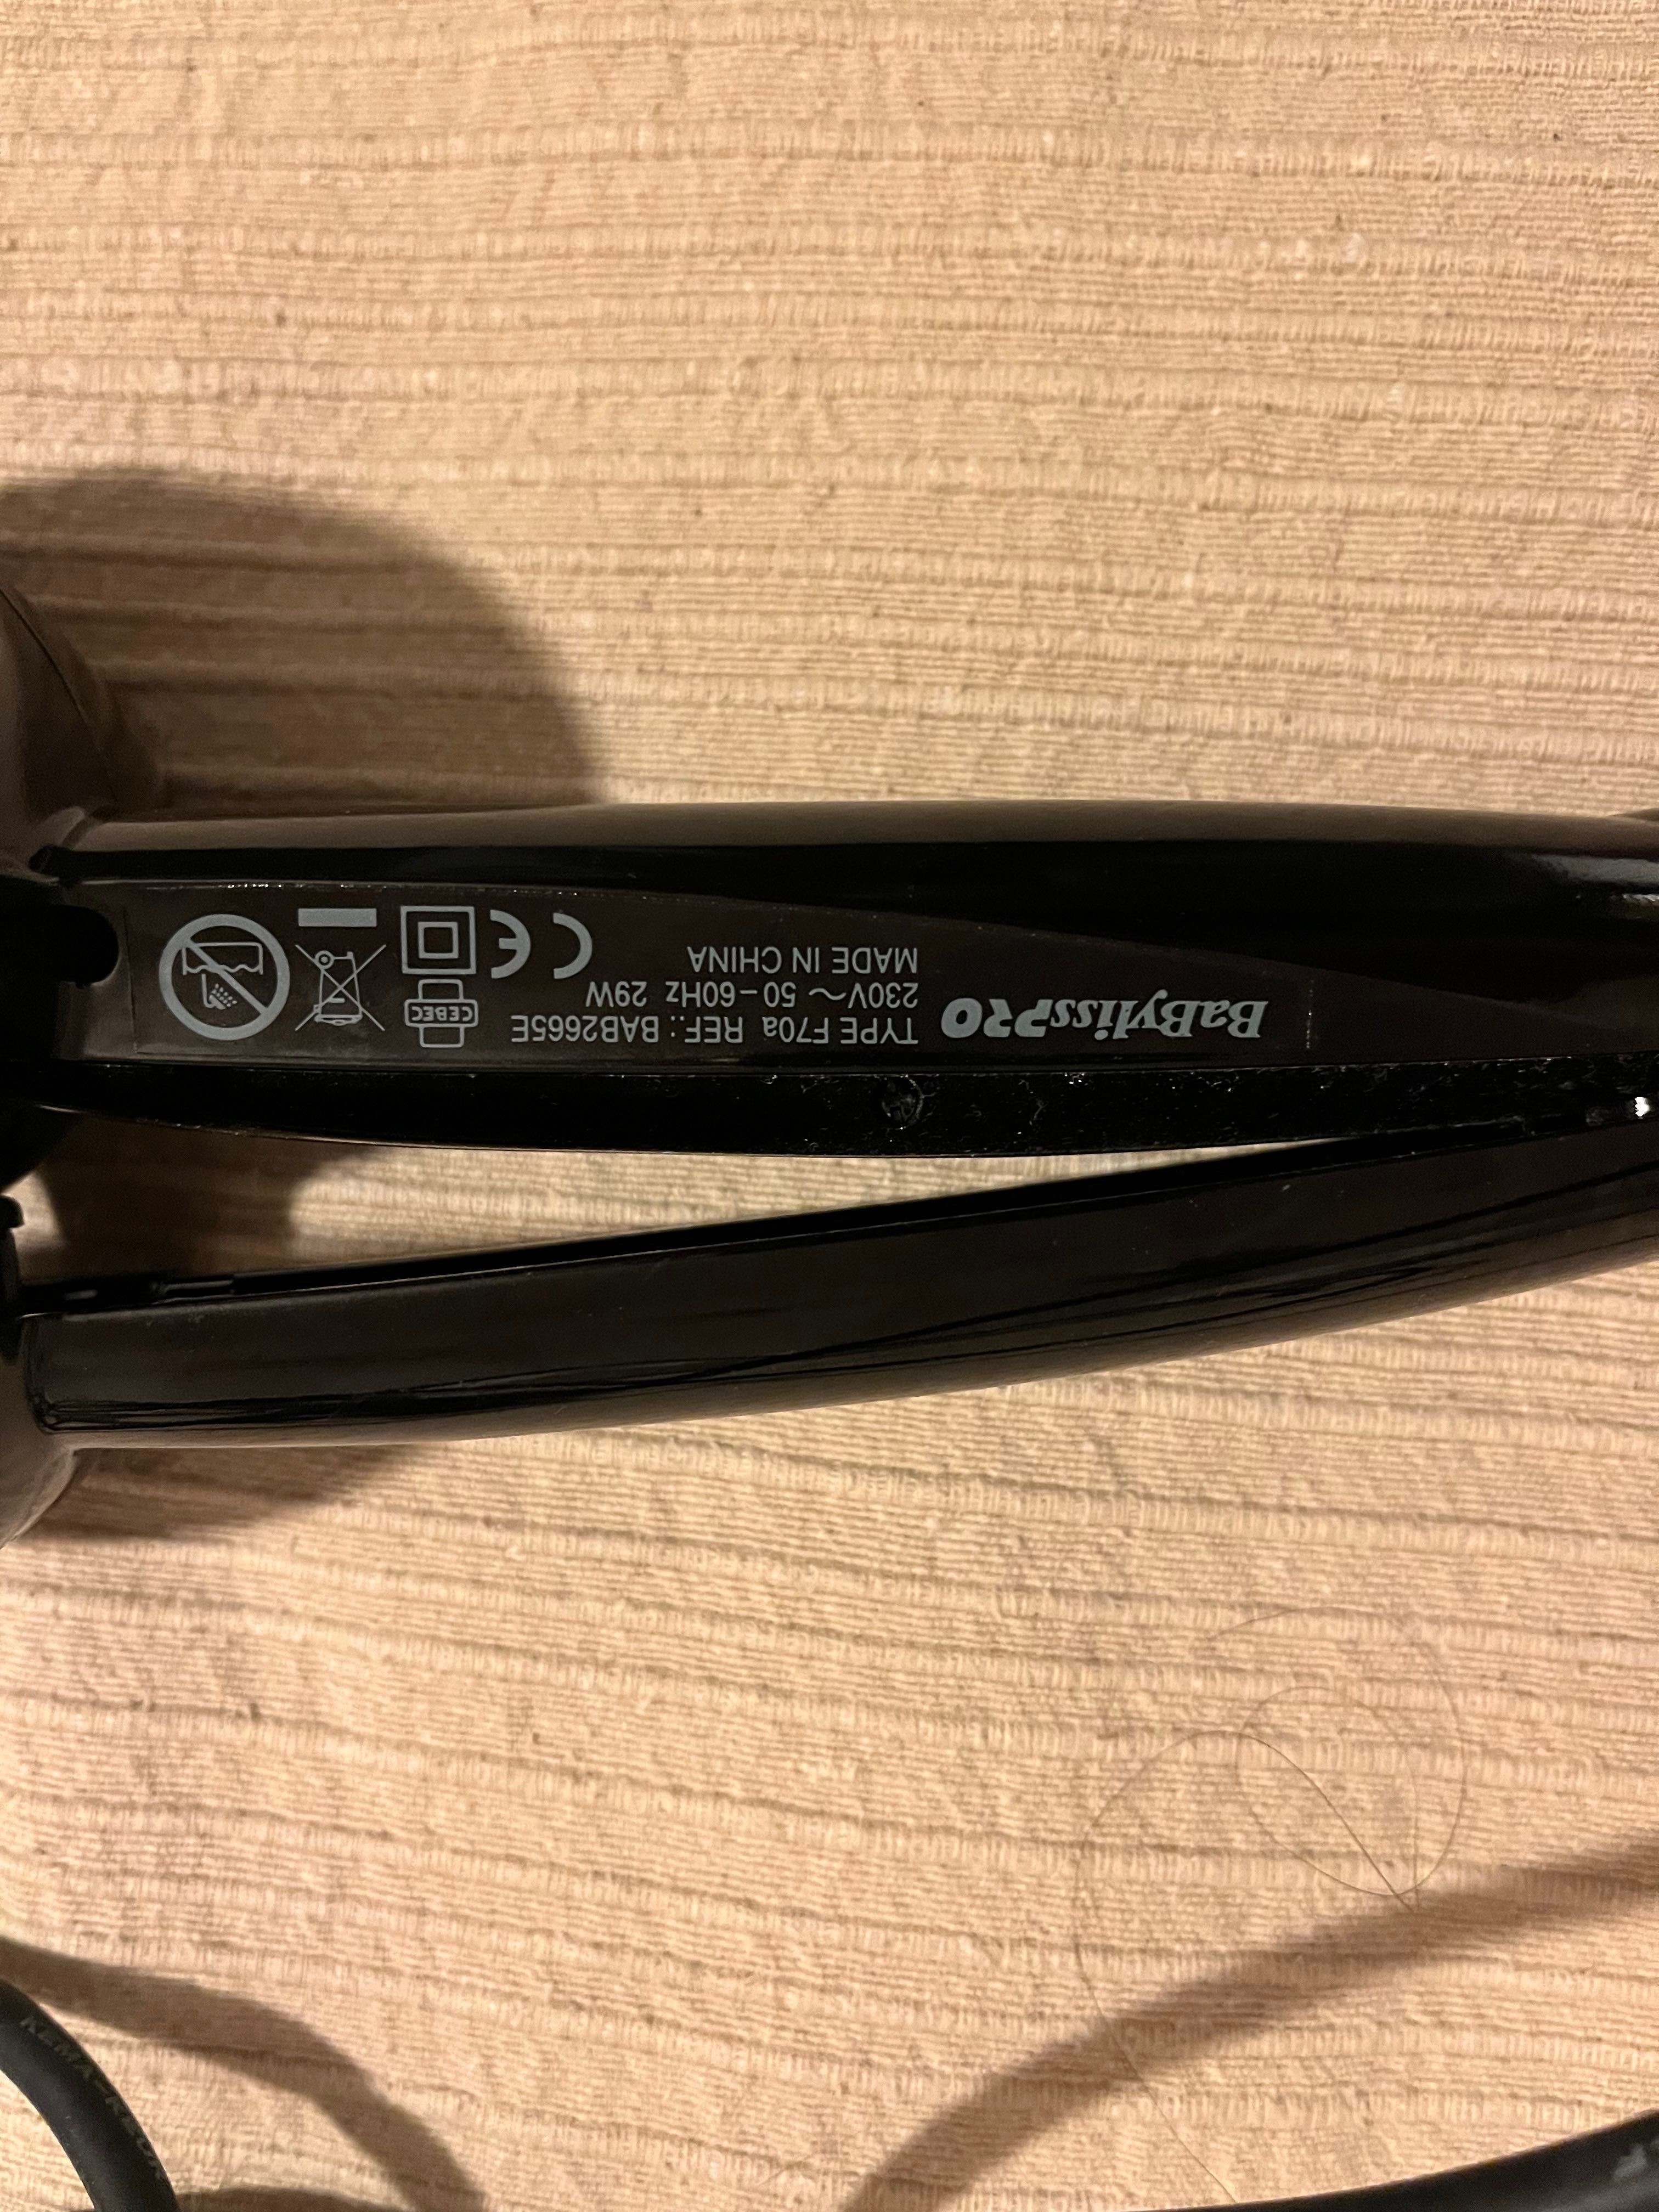 BaByliss PRO Curling Iron MiraCurl 2665E